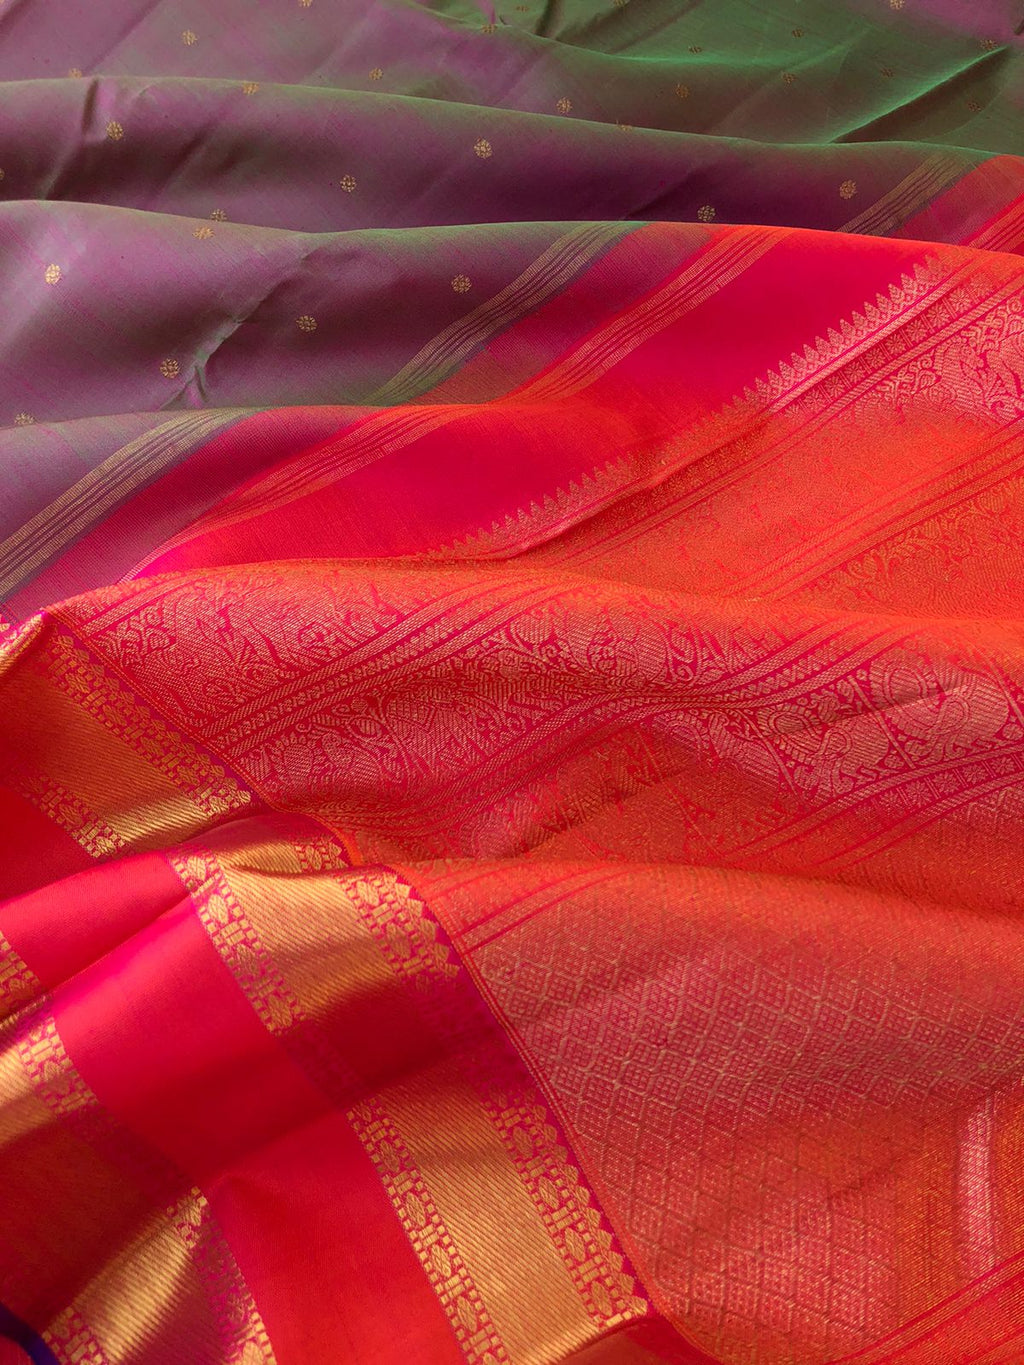 Leela - Limited Edition of Kanchivarams - a gorgeous perfect dual tone effects of pink short green with orange short pink pallu and blouse